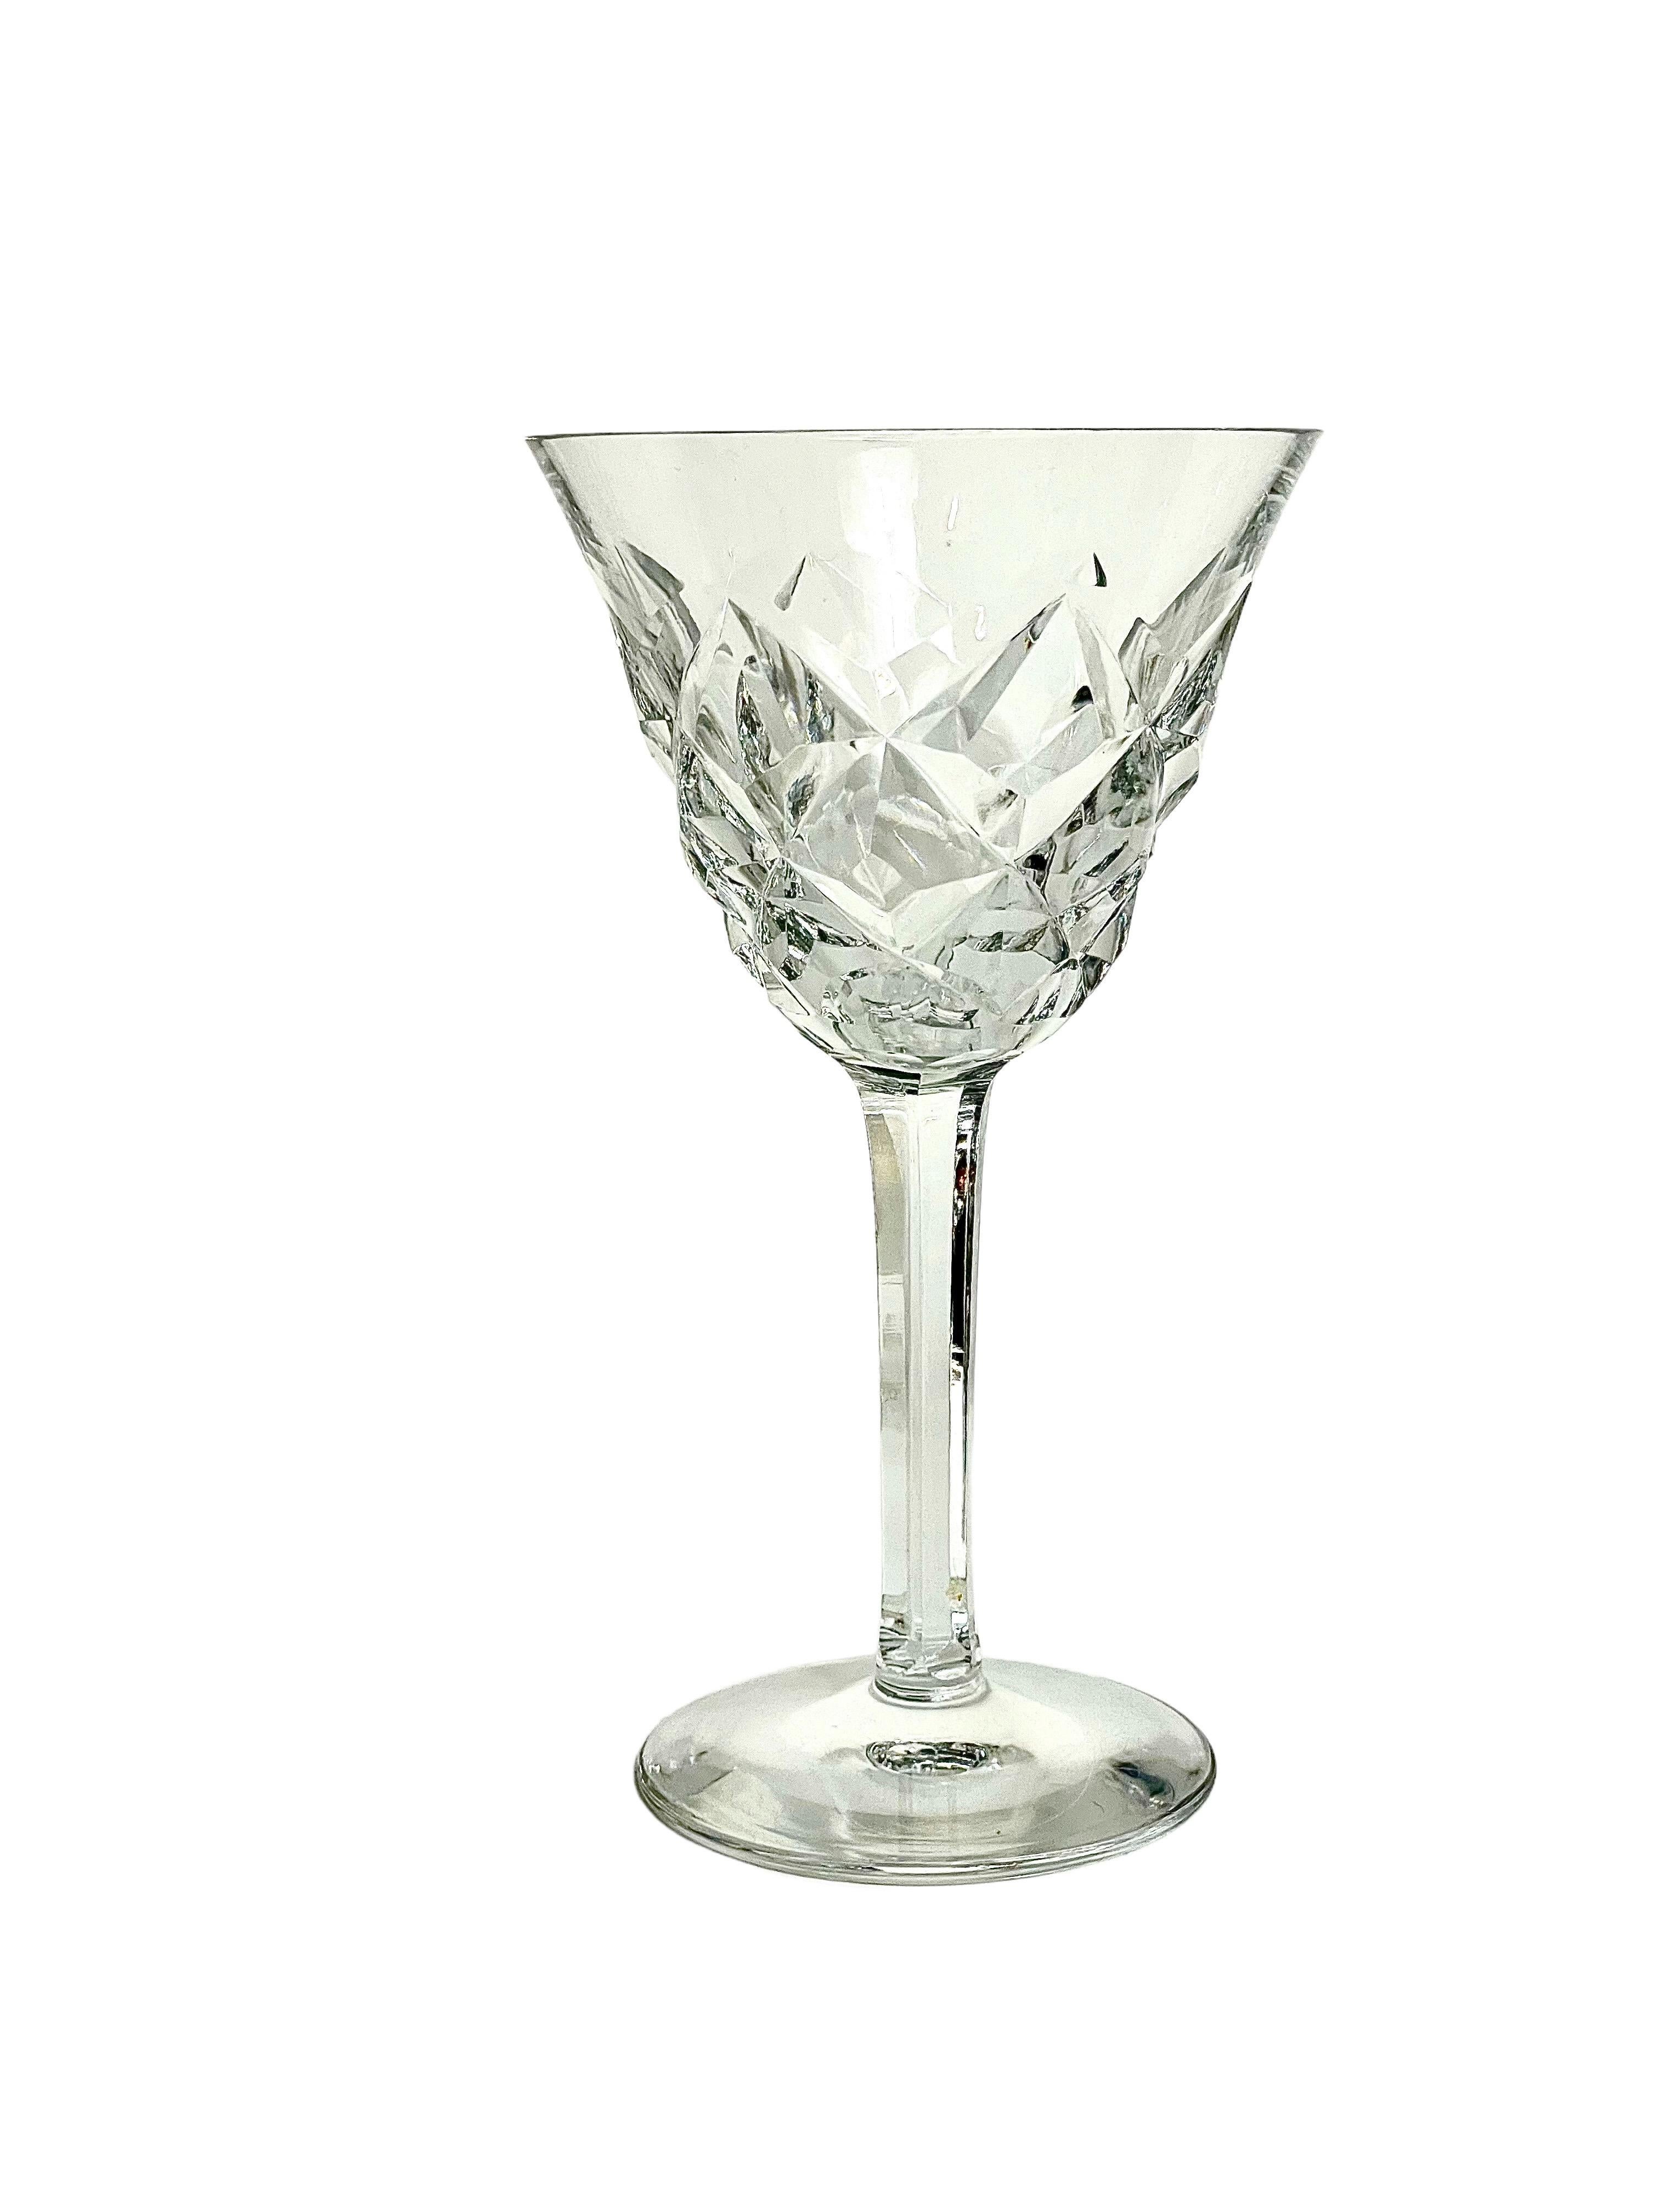 A sparkling set of 10 fine crystal wine or water glasses, by Saint Louis, from the 'Adour' pattern series. Dating from around 1950, these timeless glasses feature the classic Adour 'cross cut diamond' design on their body, with faceted stems and